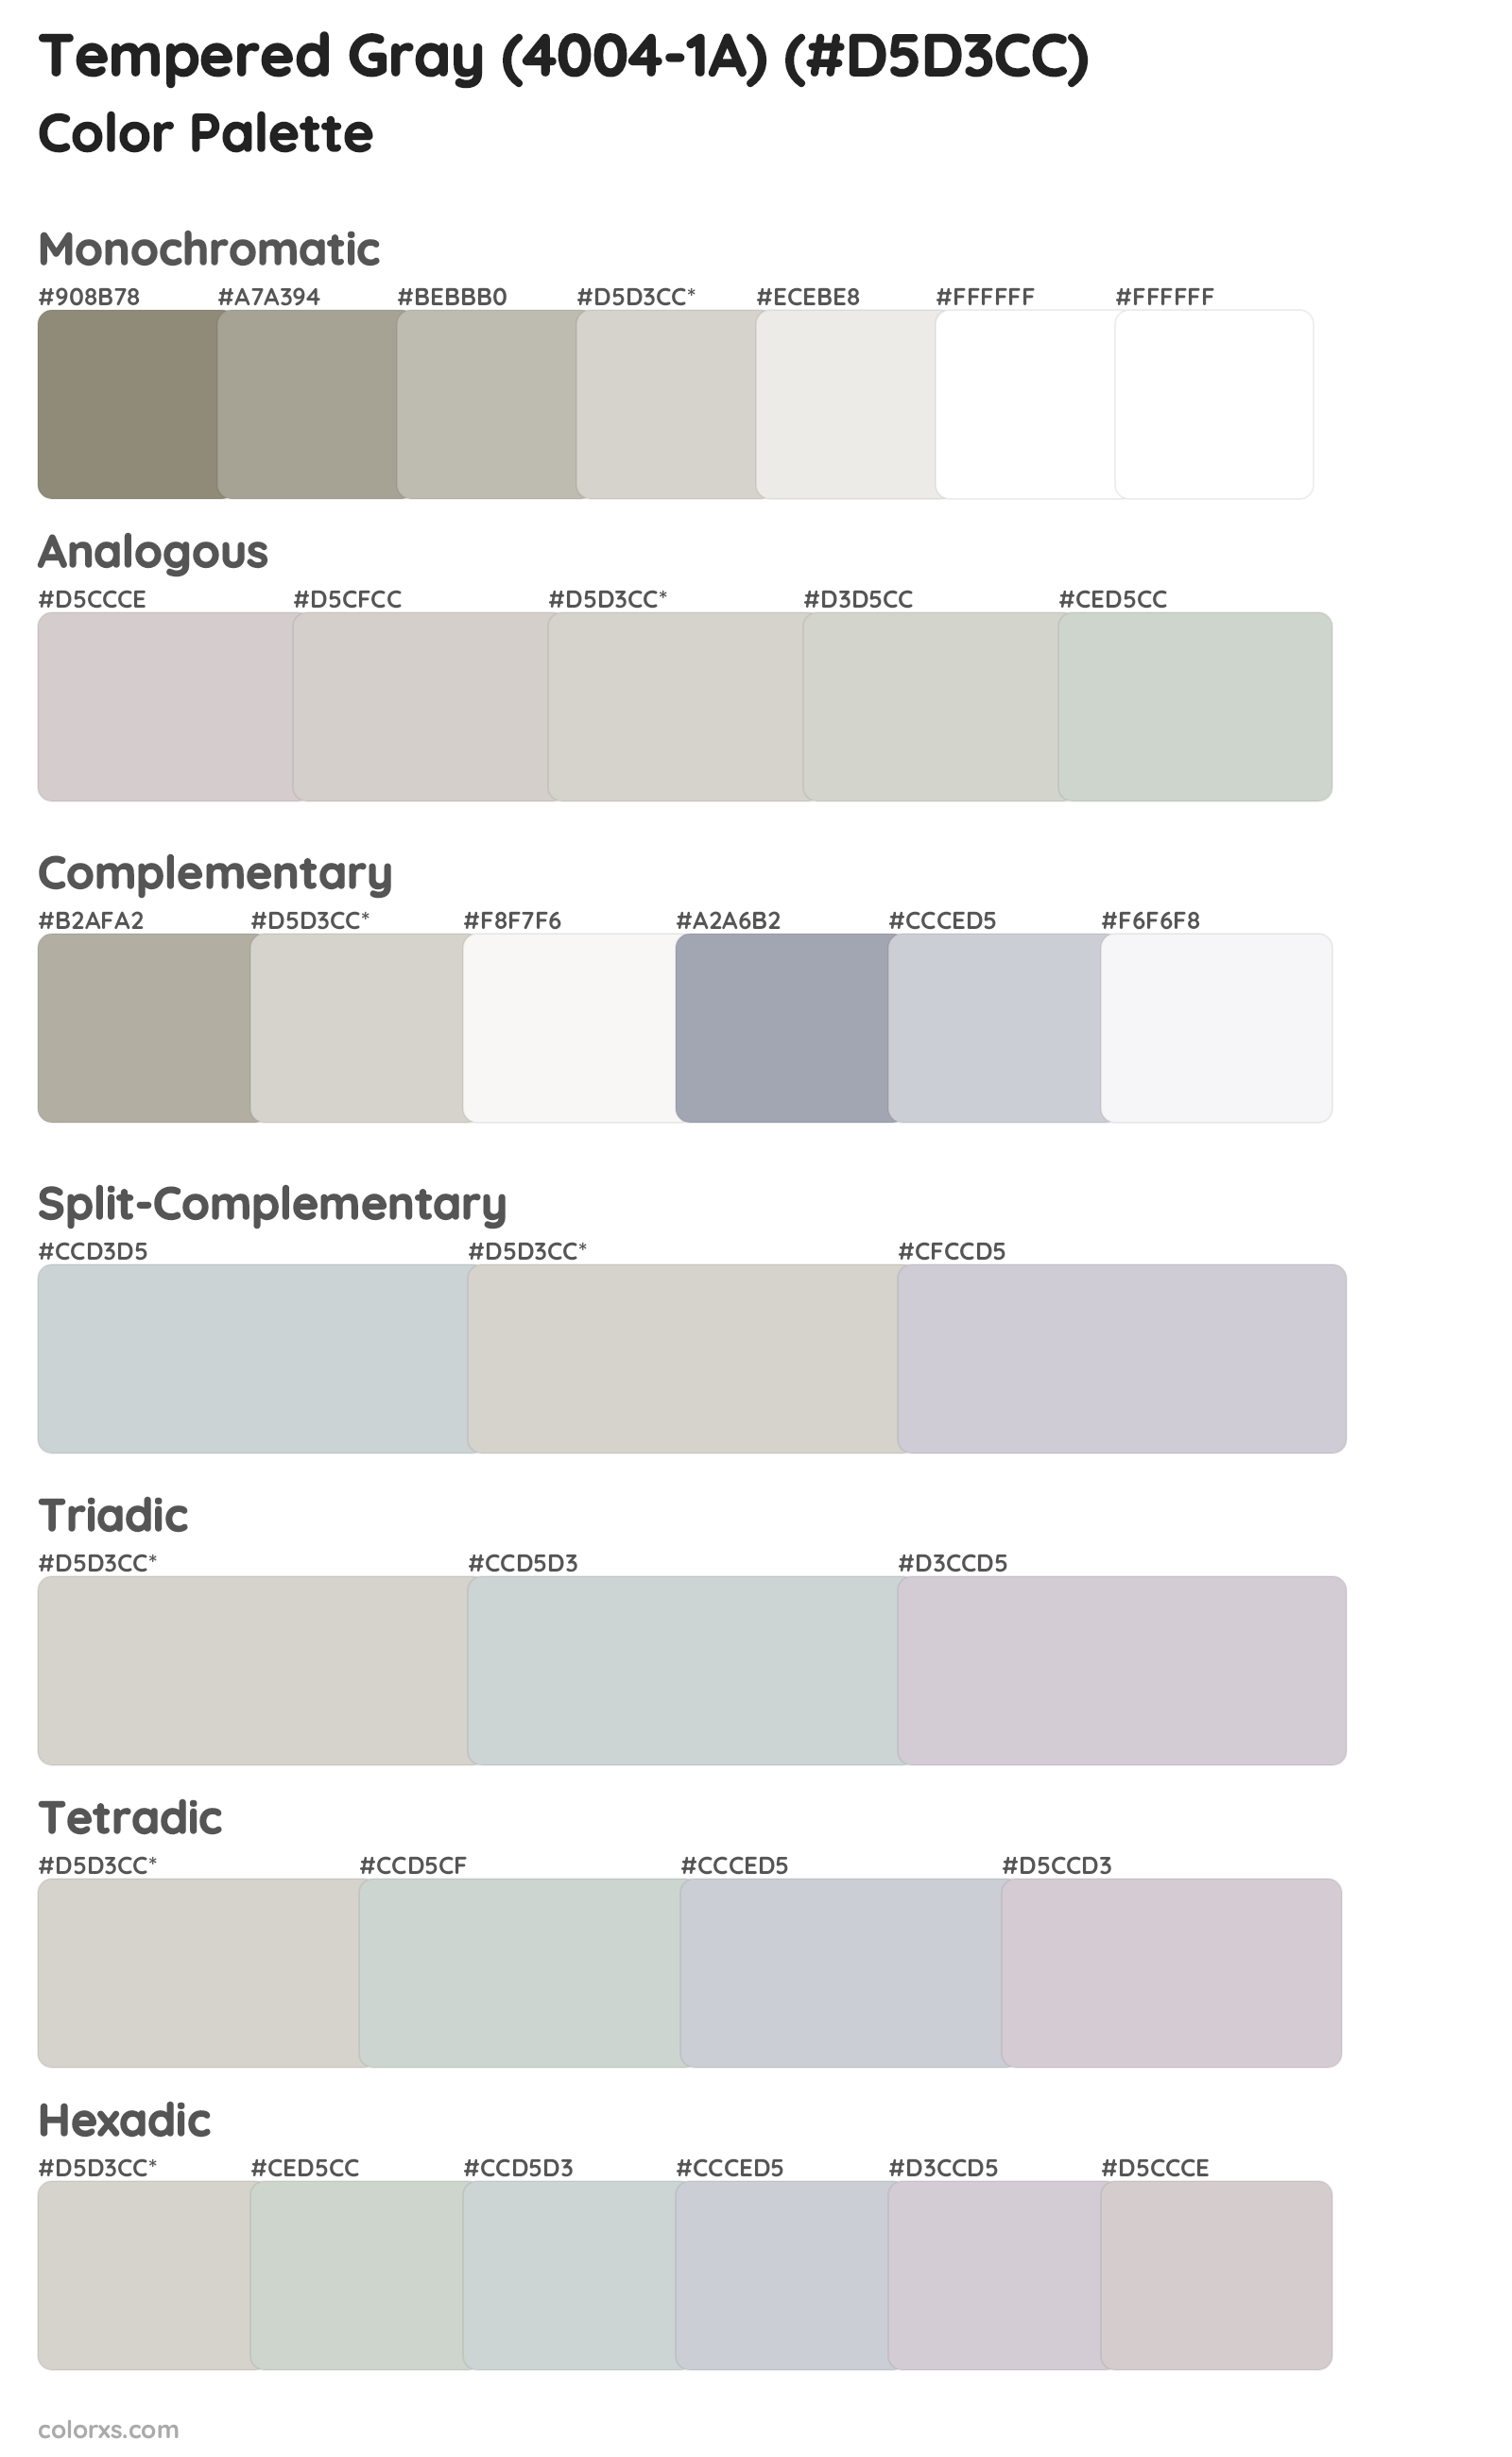 Tempered Gray (4004-1A) Color Scheme Palettes